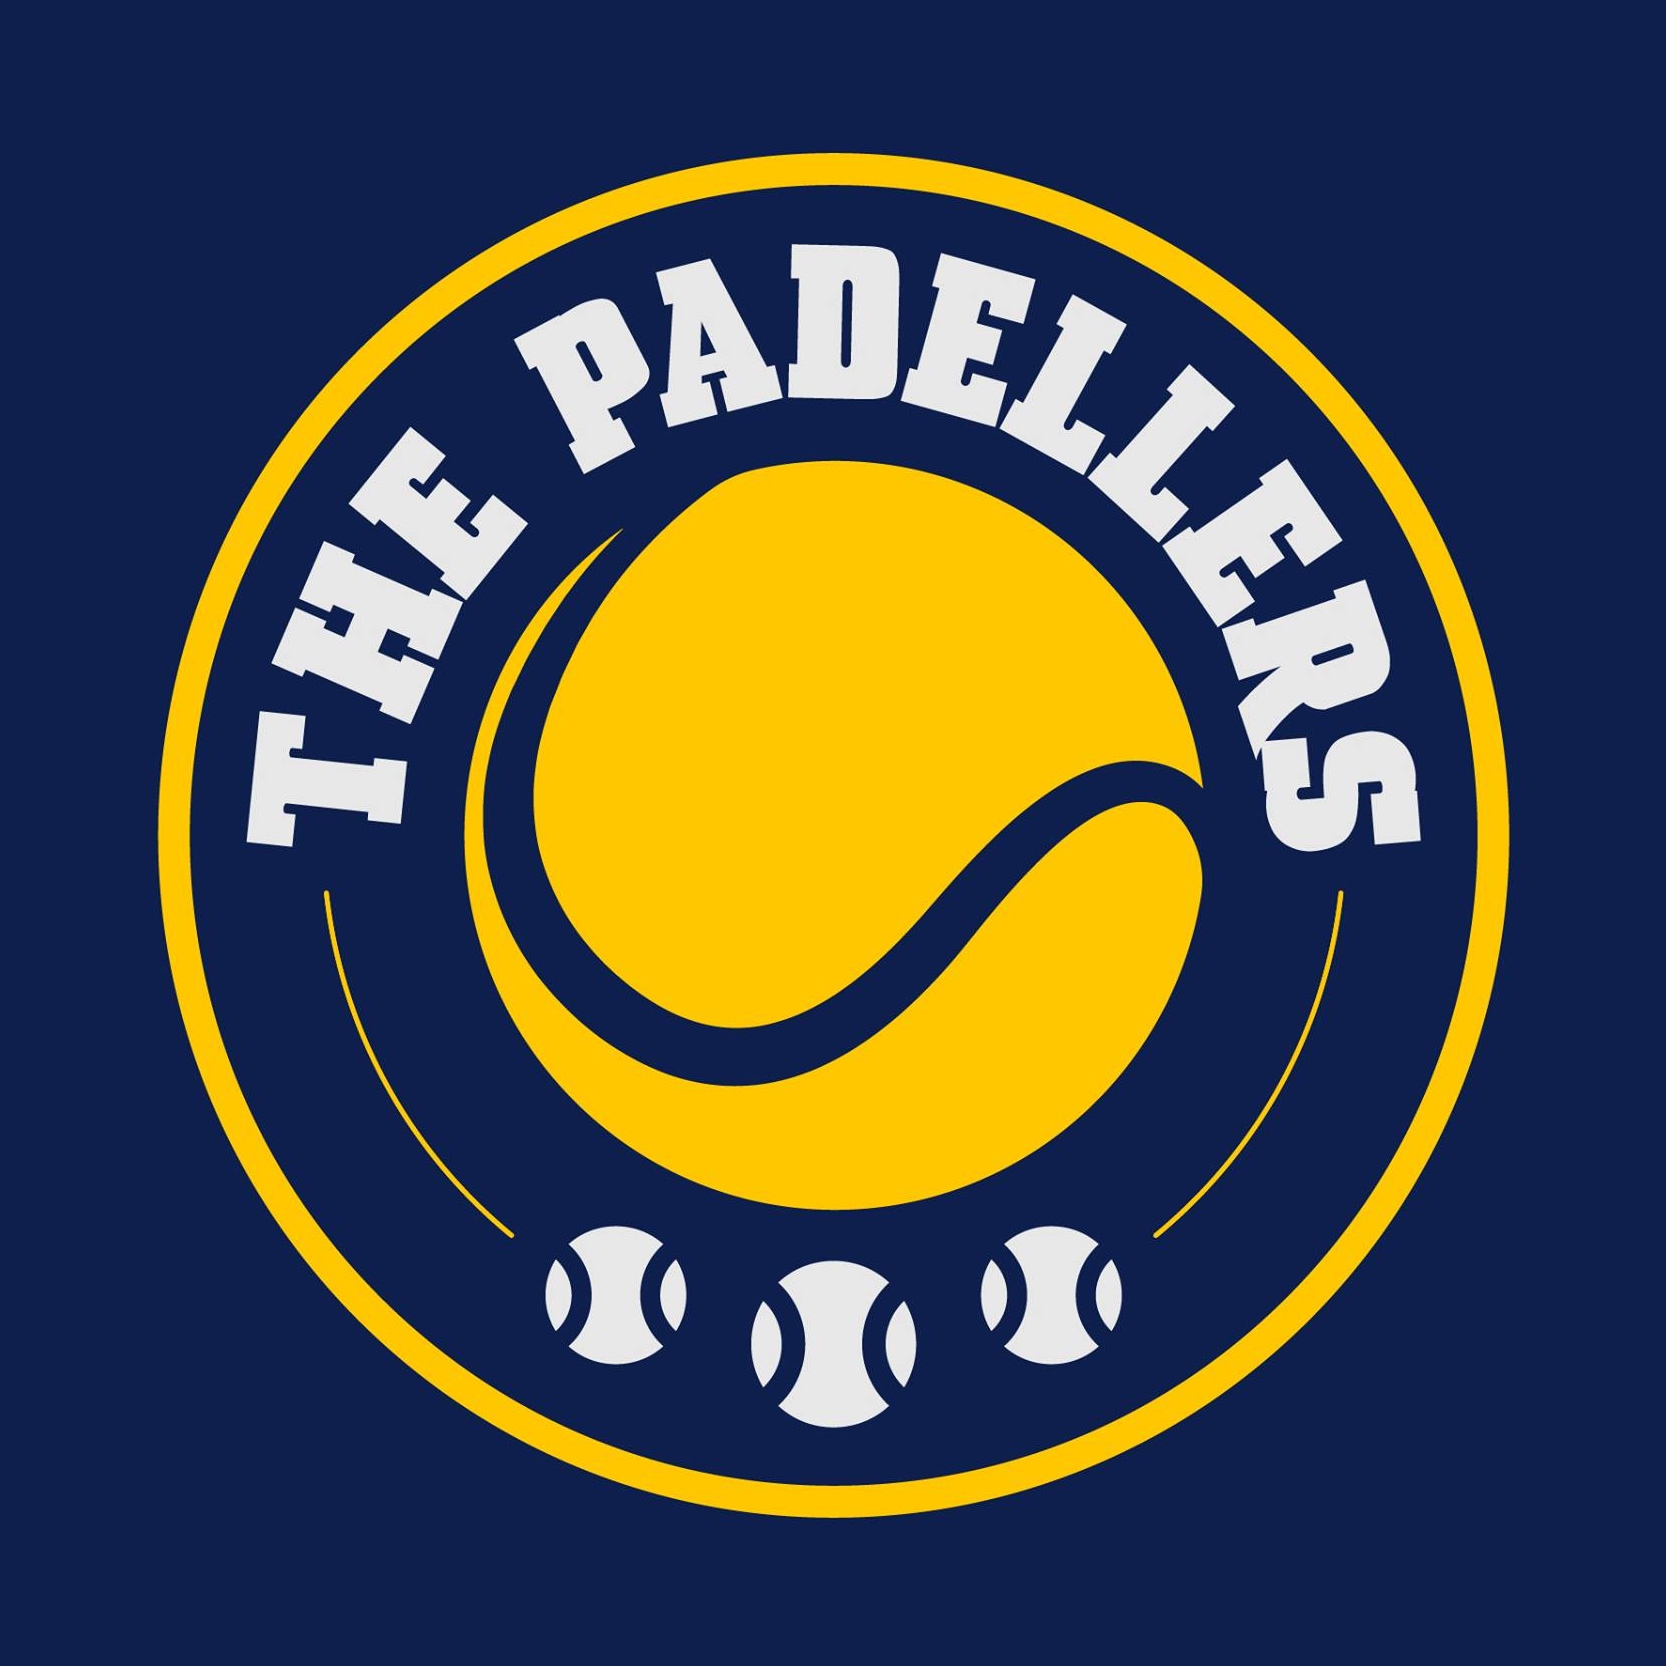 Profile image of venue The Padellers - Amsterdam West